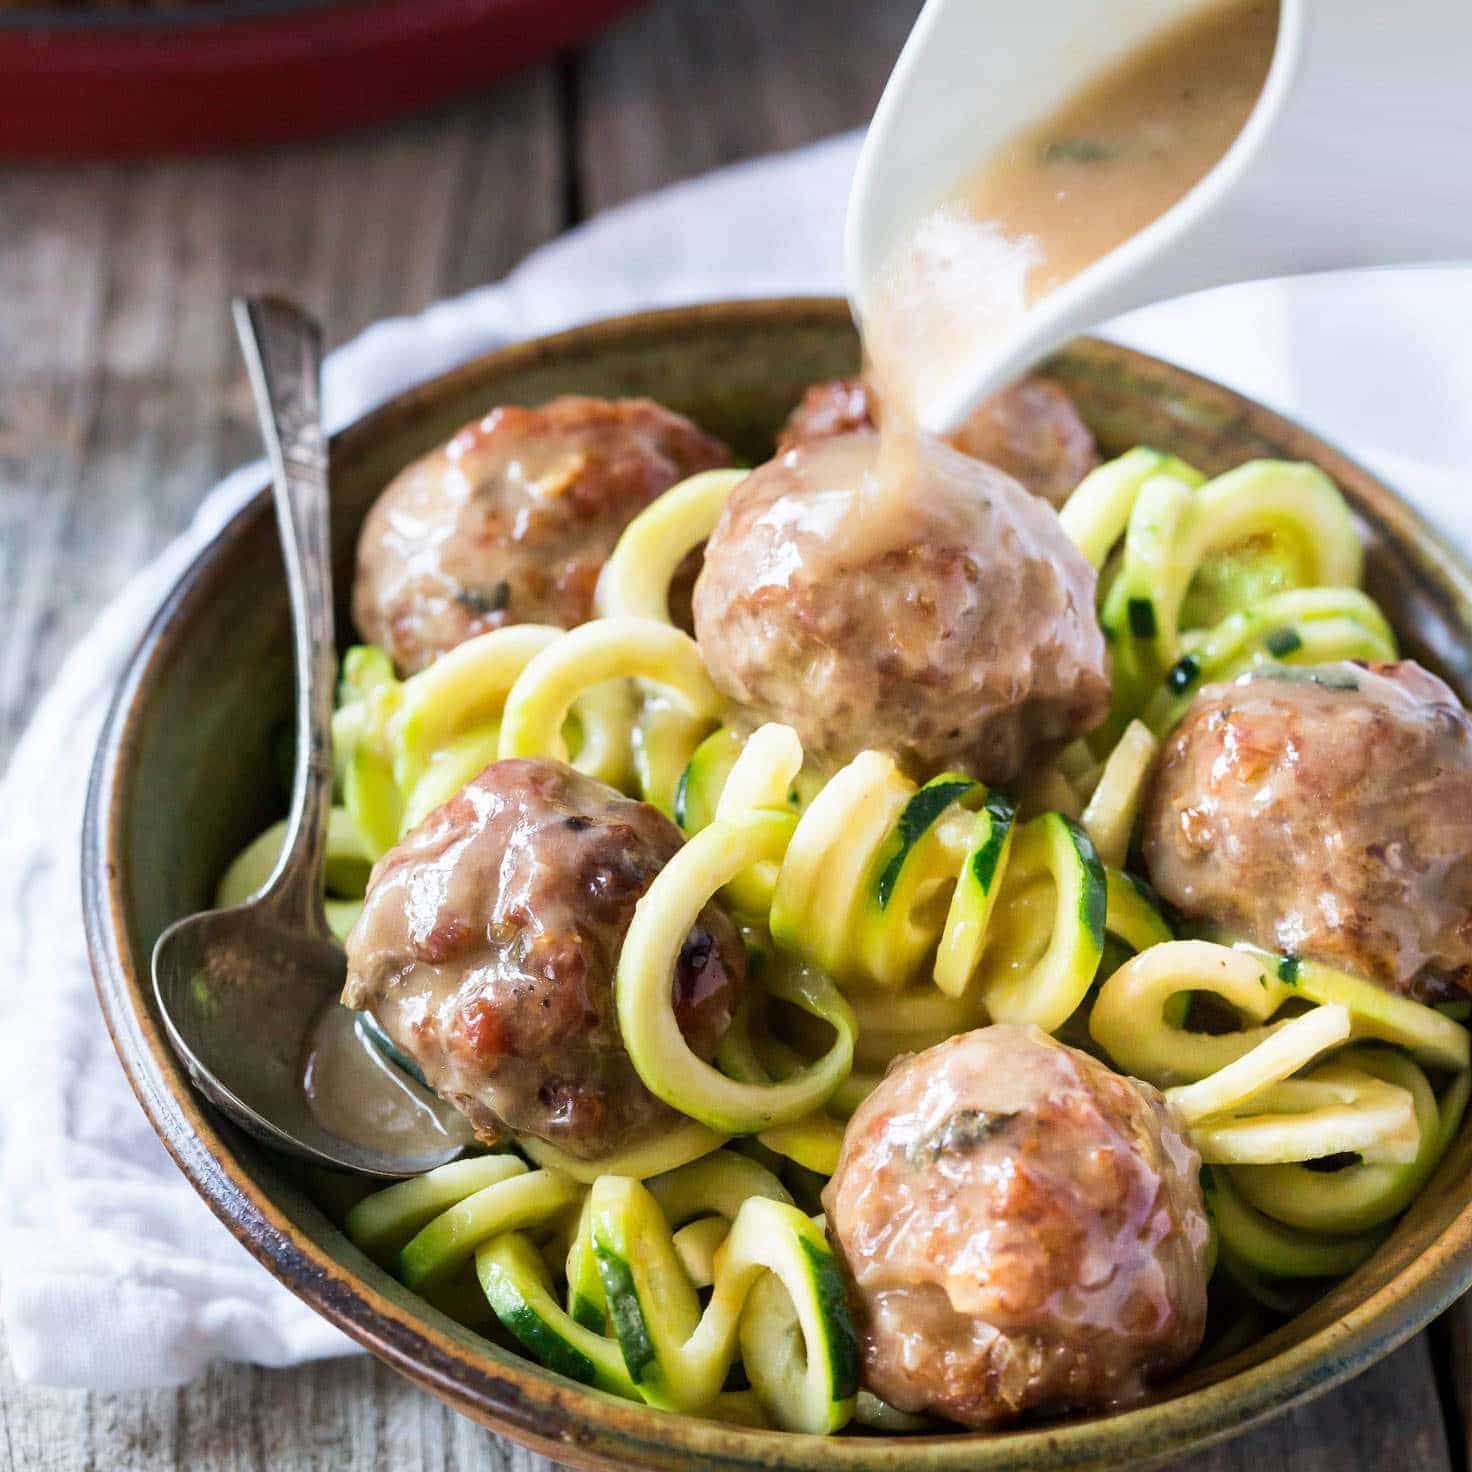 Easy Paleo Whole 30 sage and onion Meatballs with Creamy Dairy Free Gravy made with coconut milk, served with zucchini noodles (zoodles)